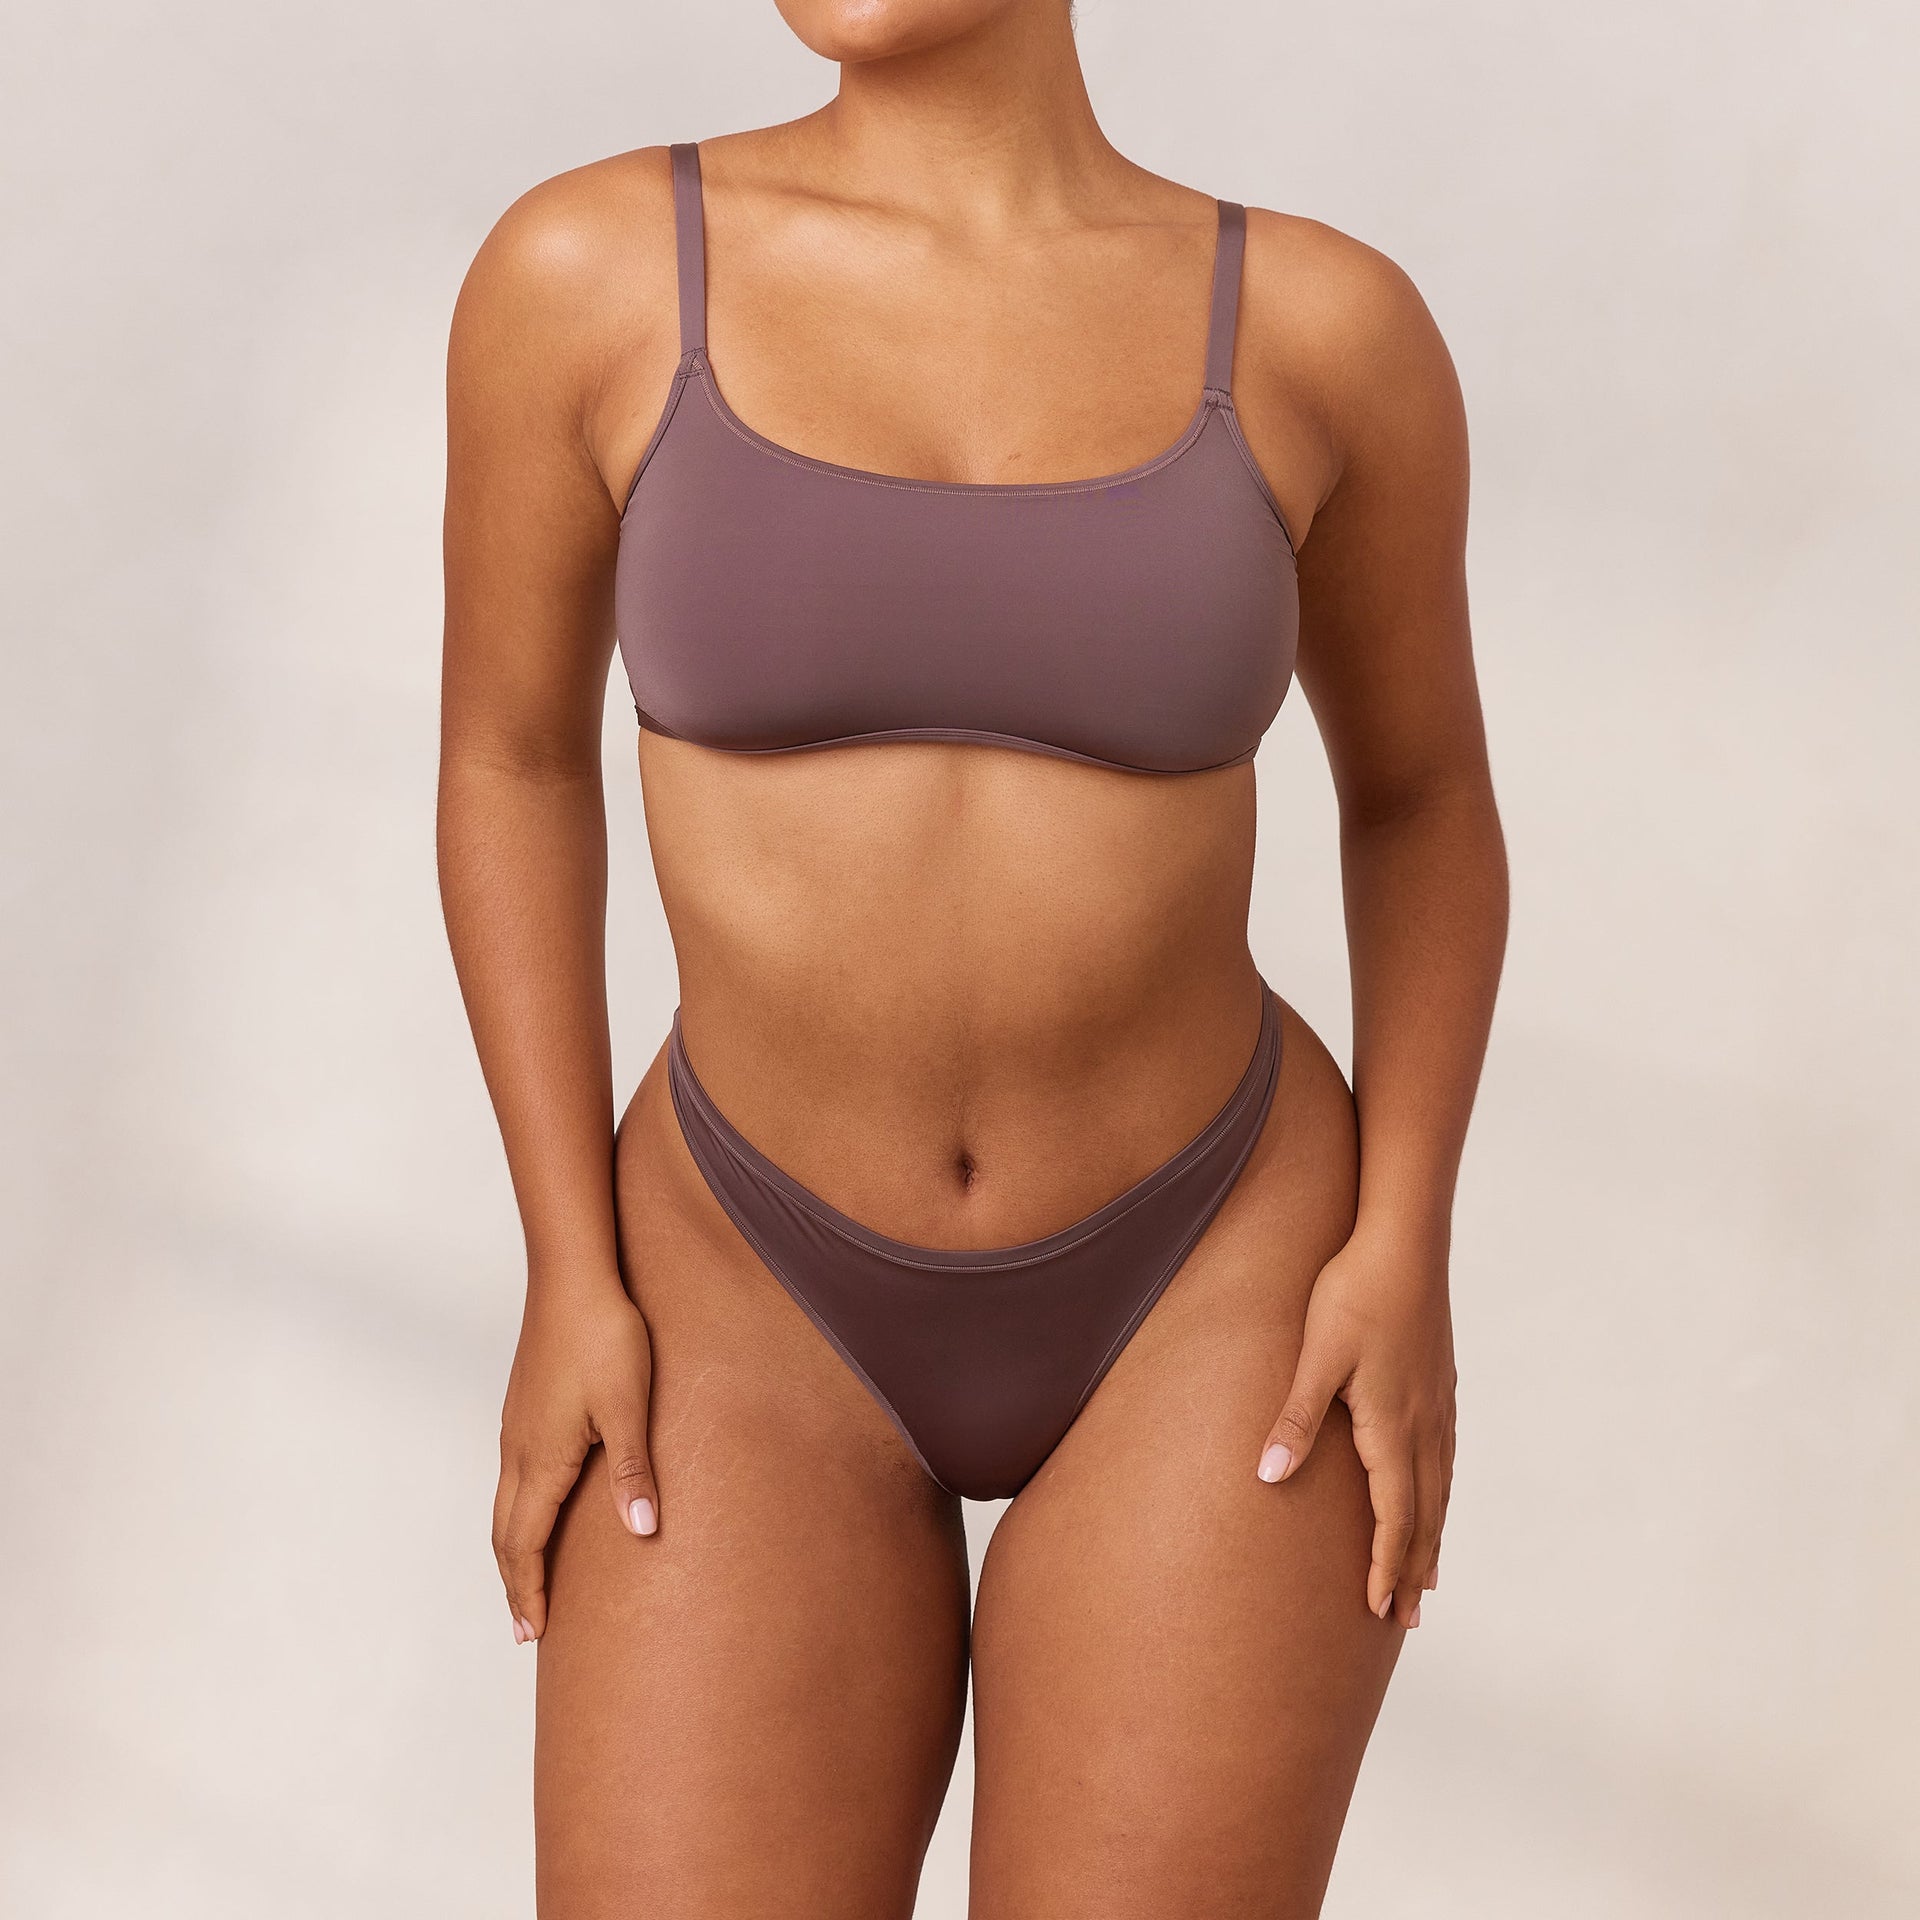 The Barely There Collection – Lounge Underwear